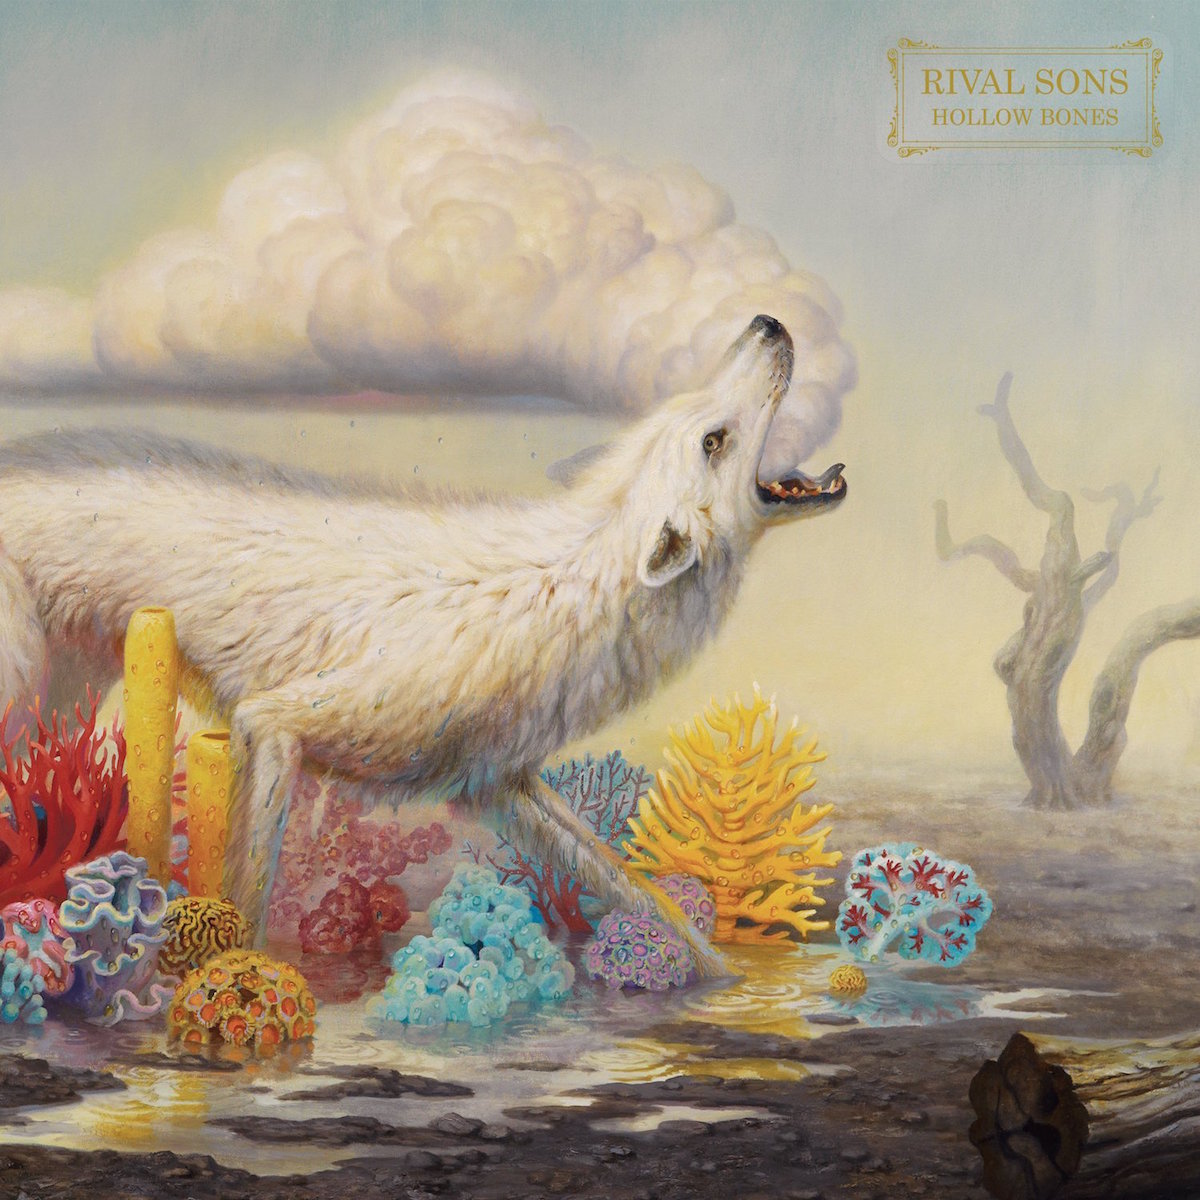 Rival Sons: Hollow Bones (2016) Book Cover